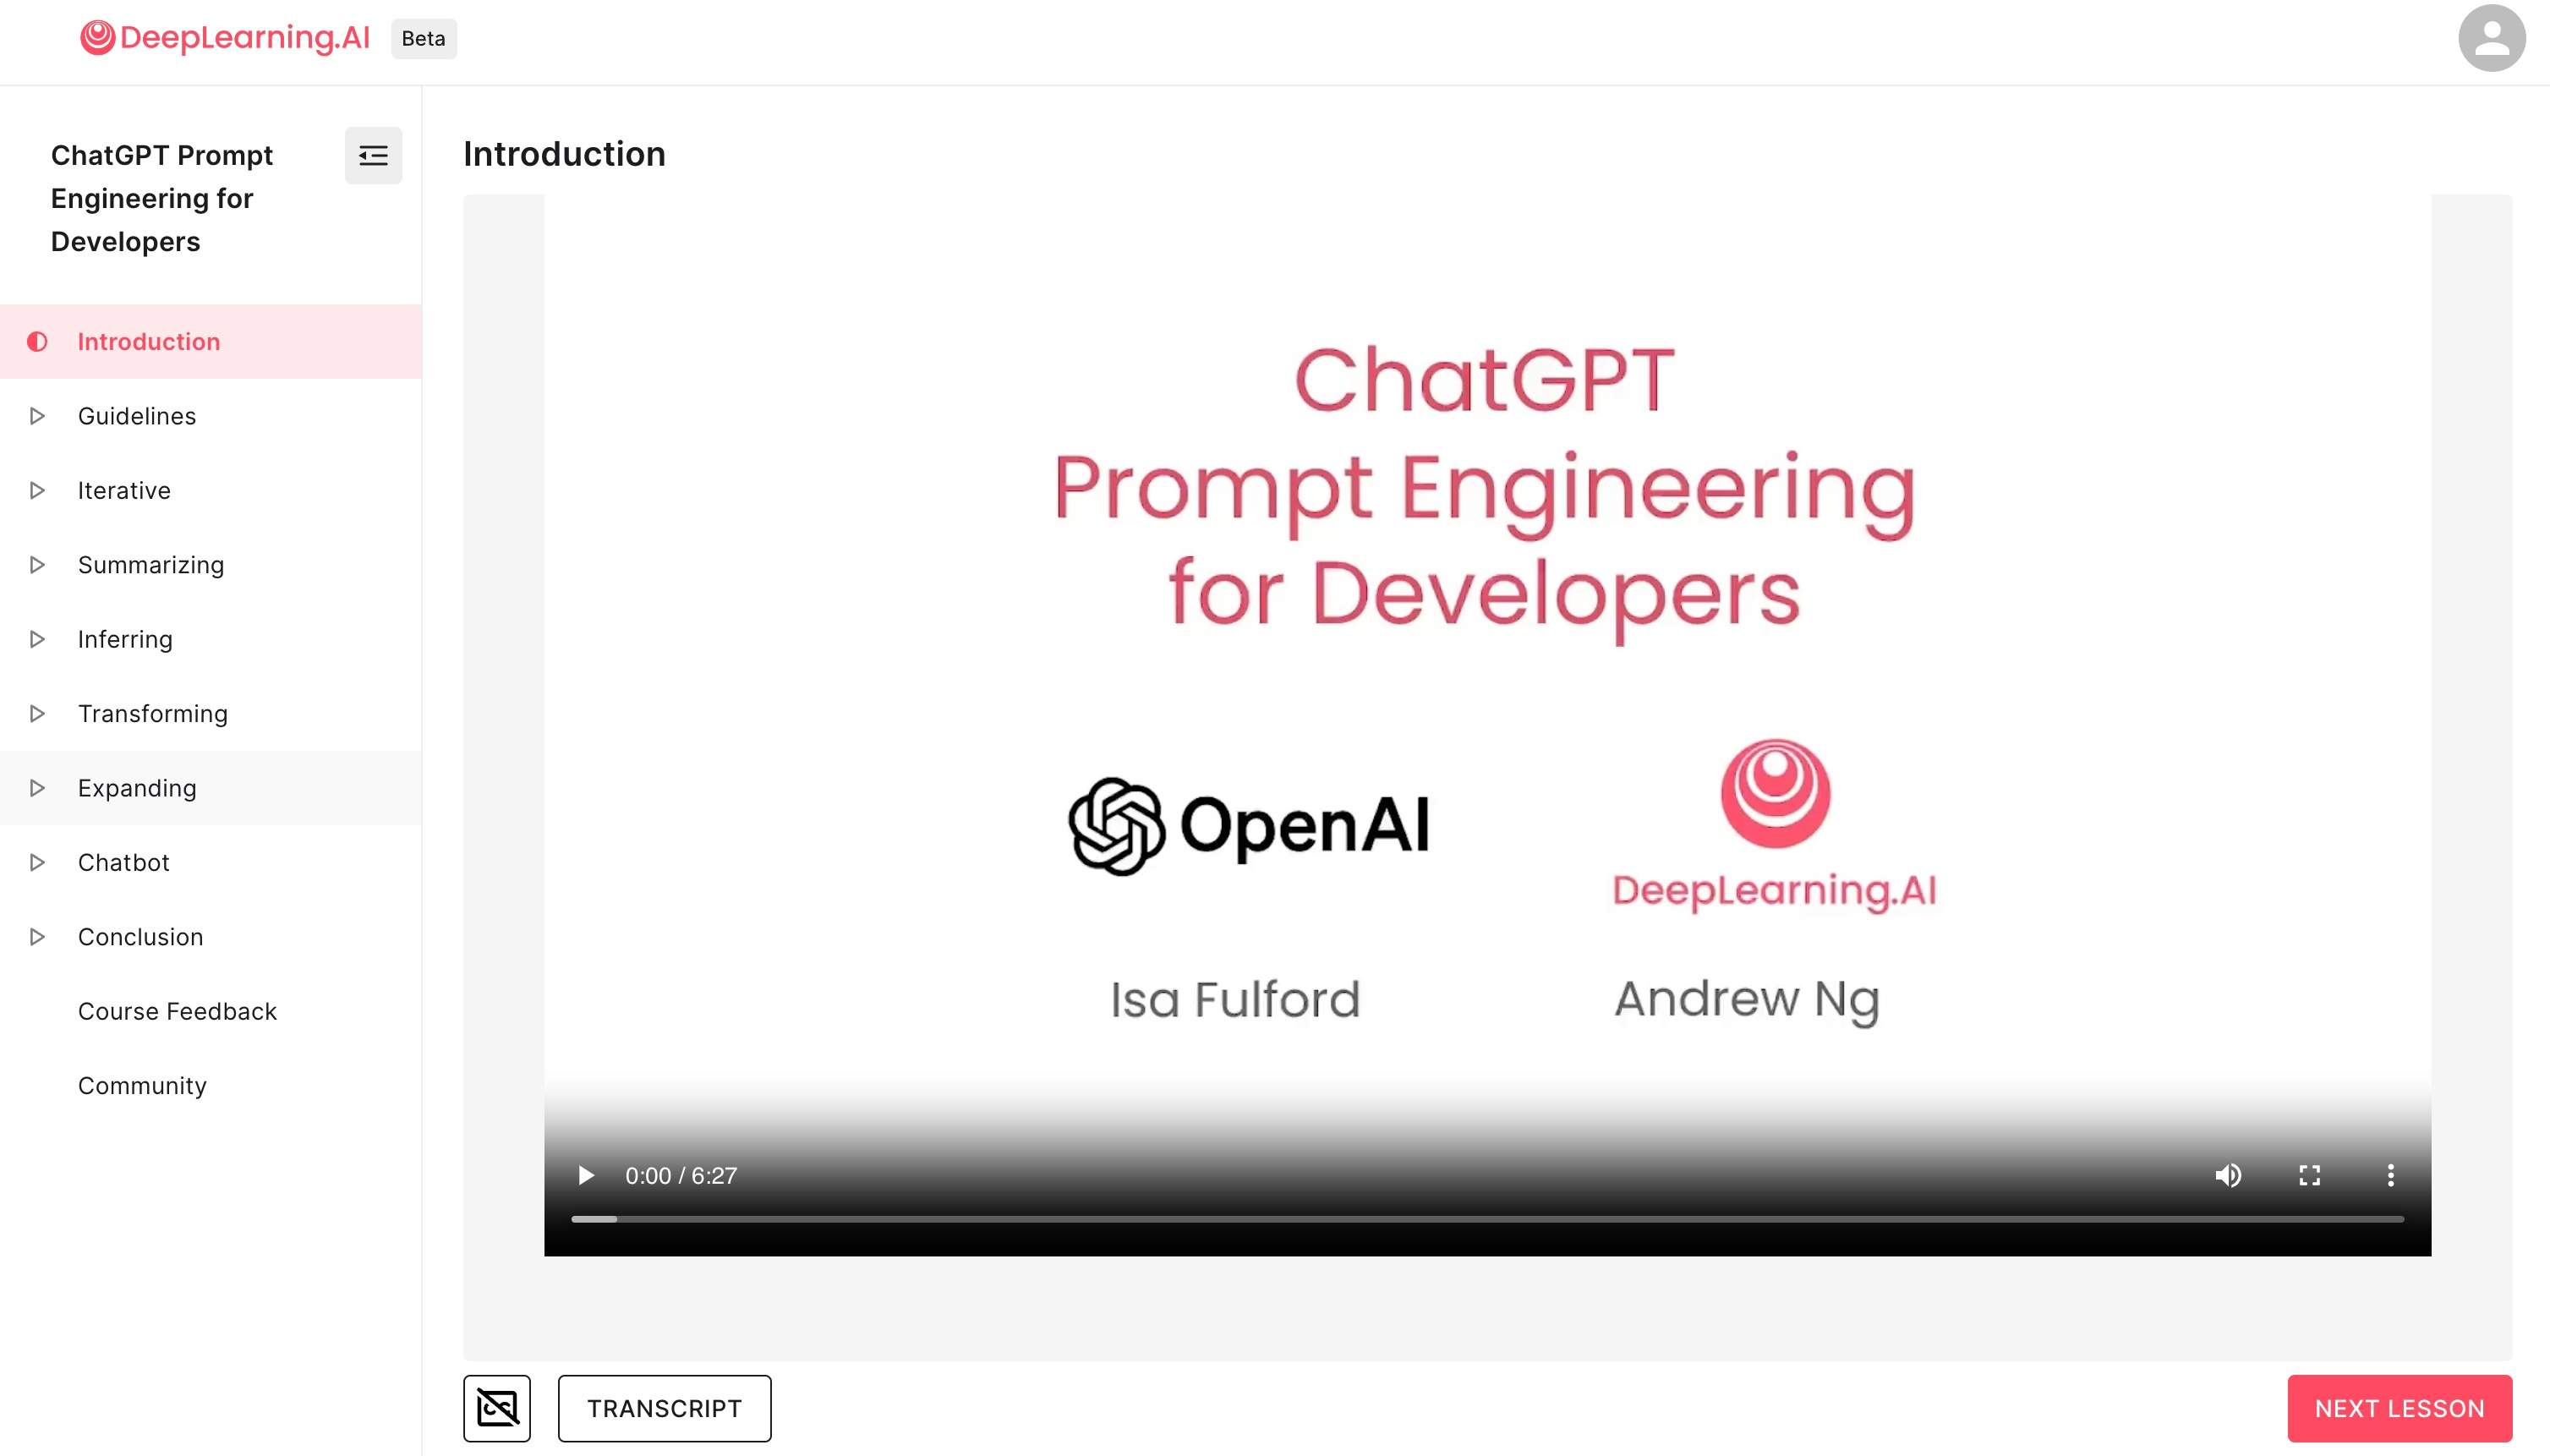 chatgpt-prompt-engineering-for-developers